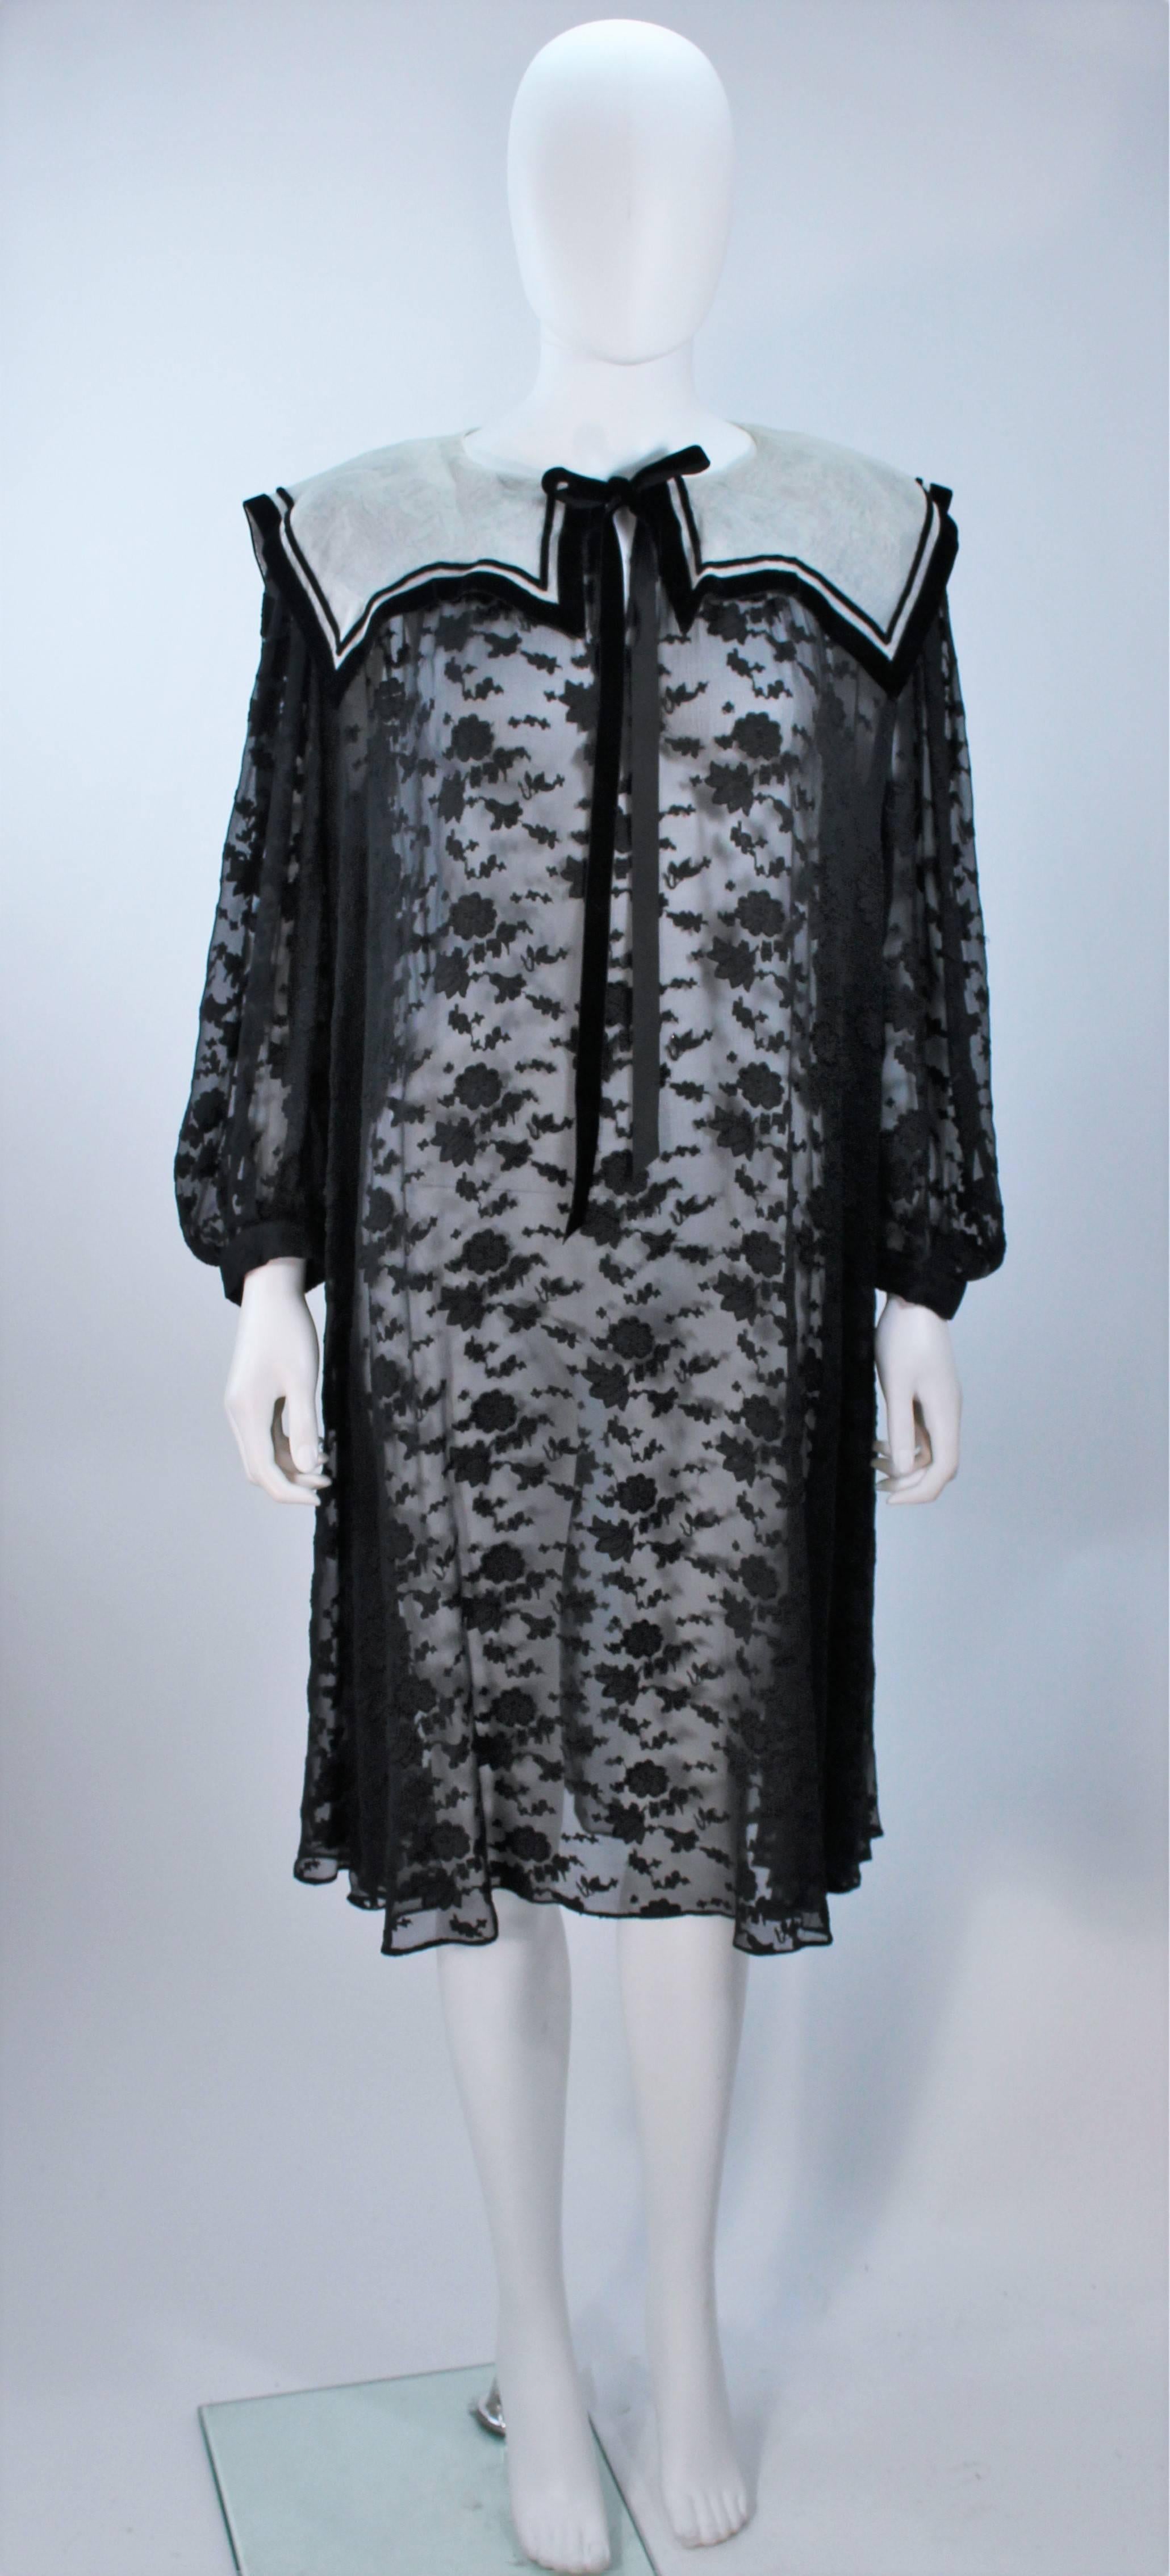 TED LAPIDUS Black Sheer Dress with Floral Detail and Velvet Trim Size 6-8 For Sale 4